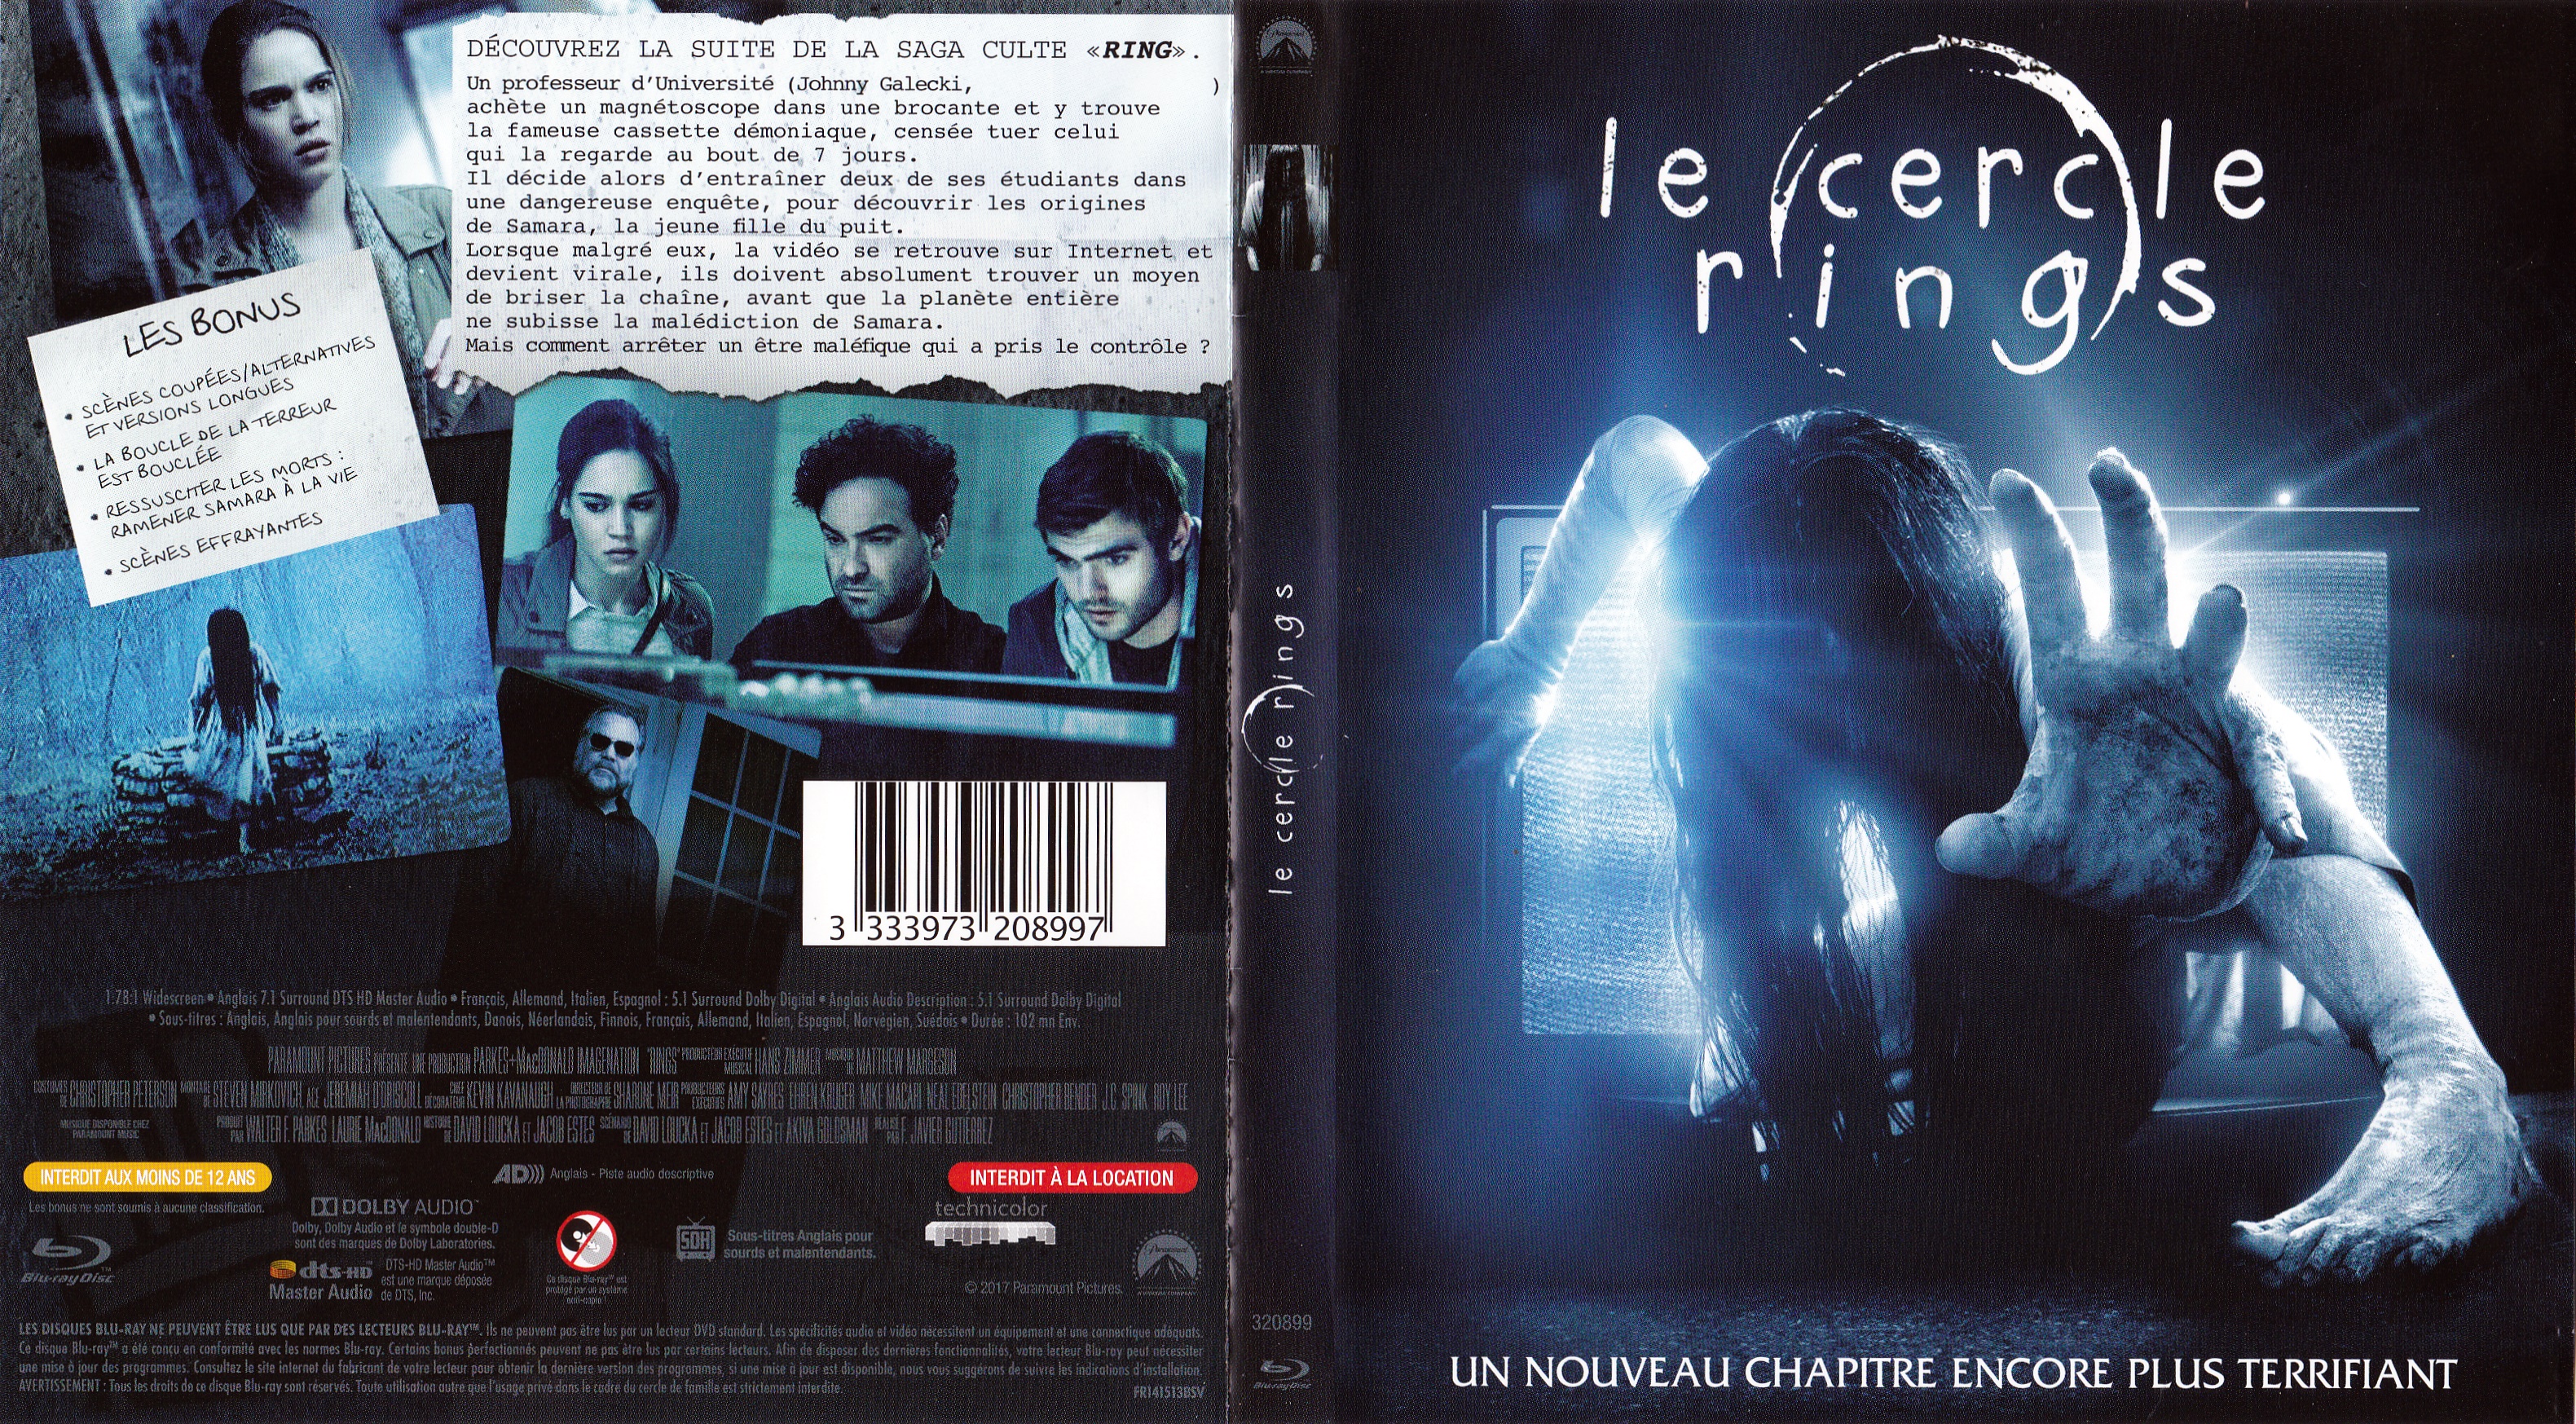 Jaquette DVD Le cercle 3 - Rings (BLU-RAY)